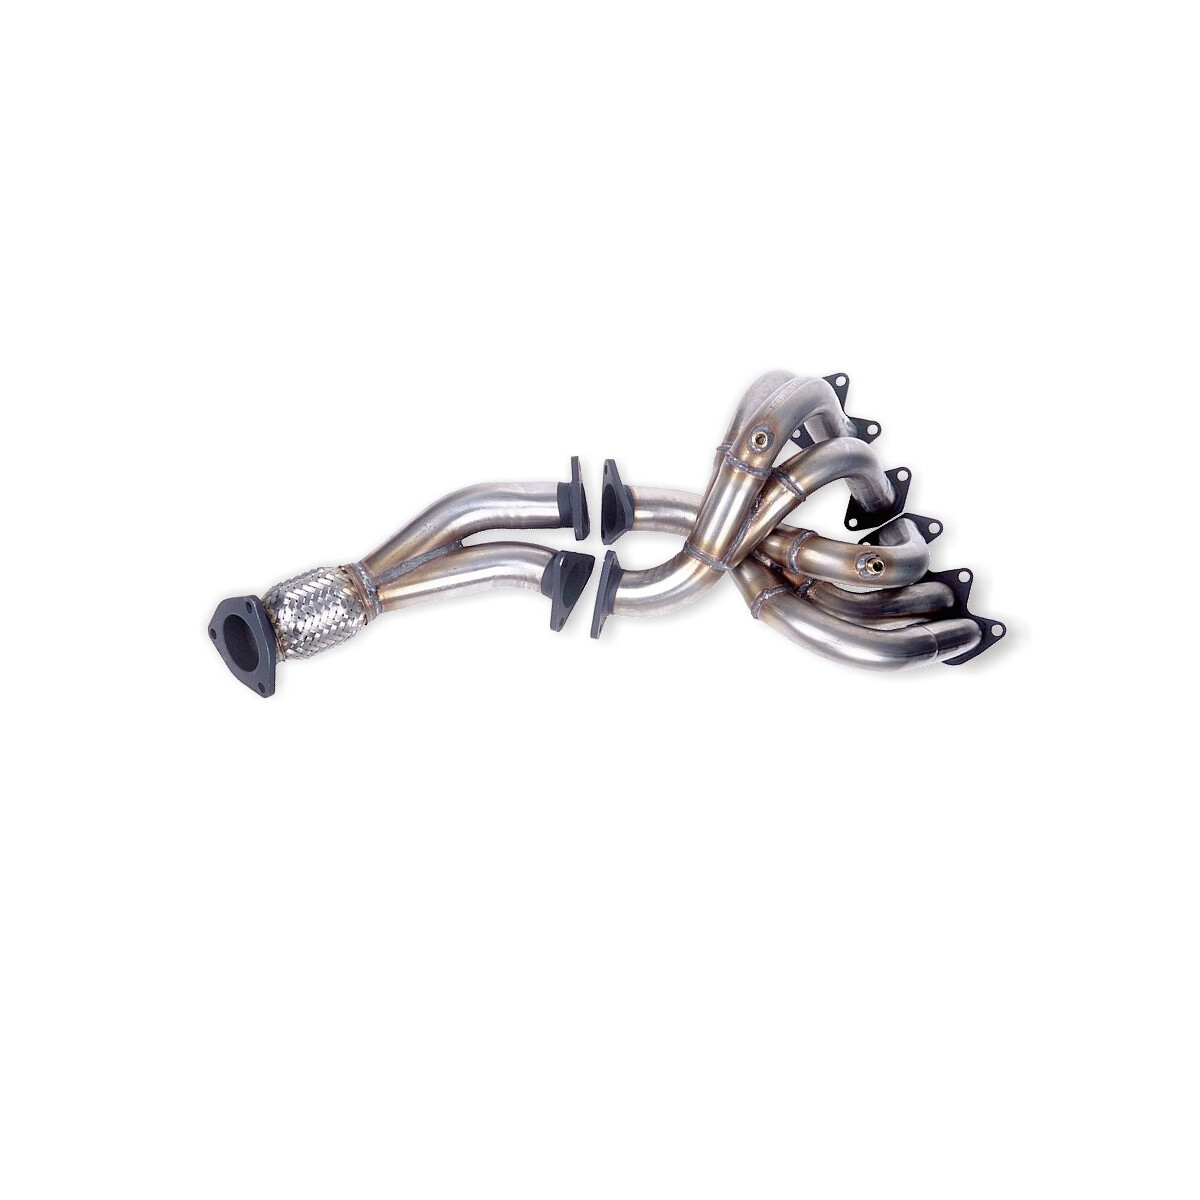 TeZet stainless steel exhaust header for Saxo...